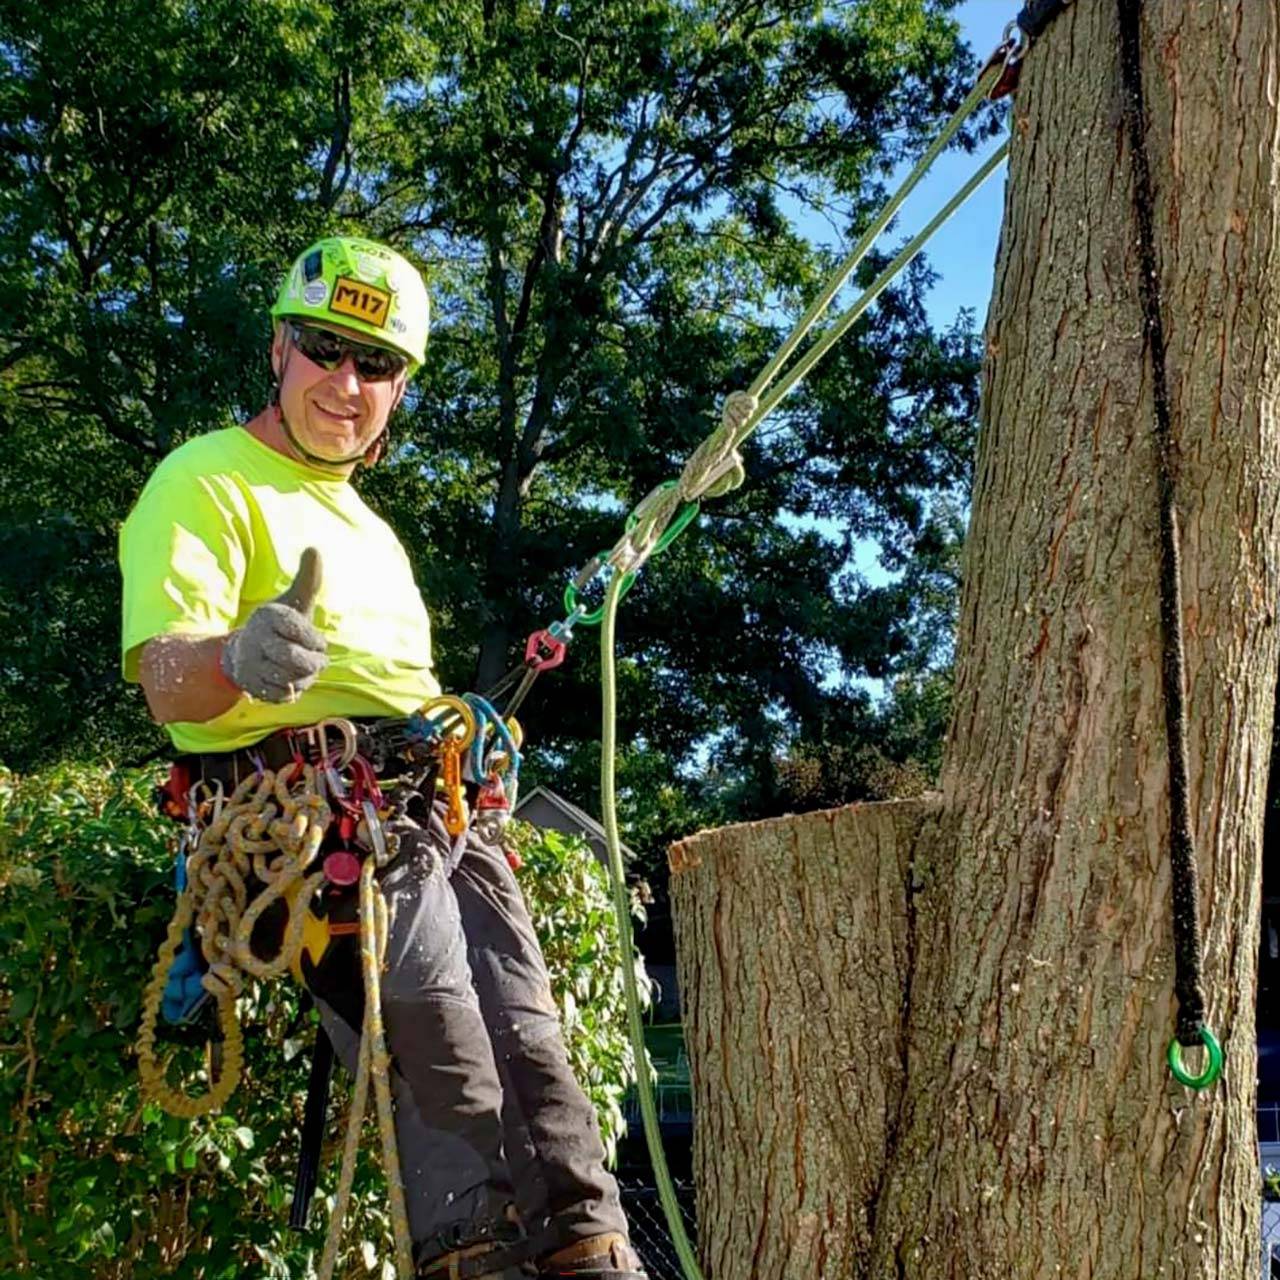 Beaver Dam Tree Service co-owner, Mark Sill giving thumbs-up while being attached to a tree trunk with a harness.